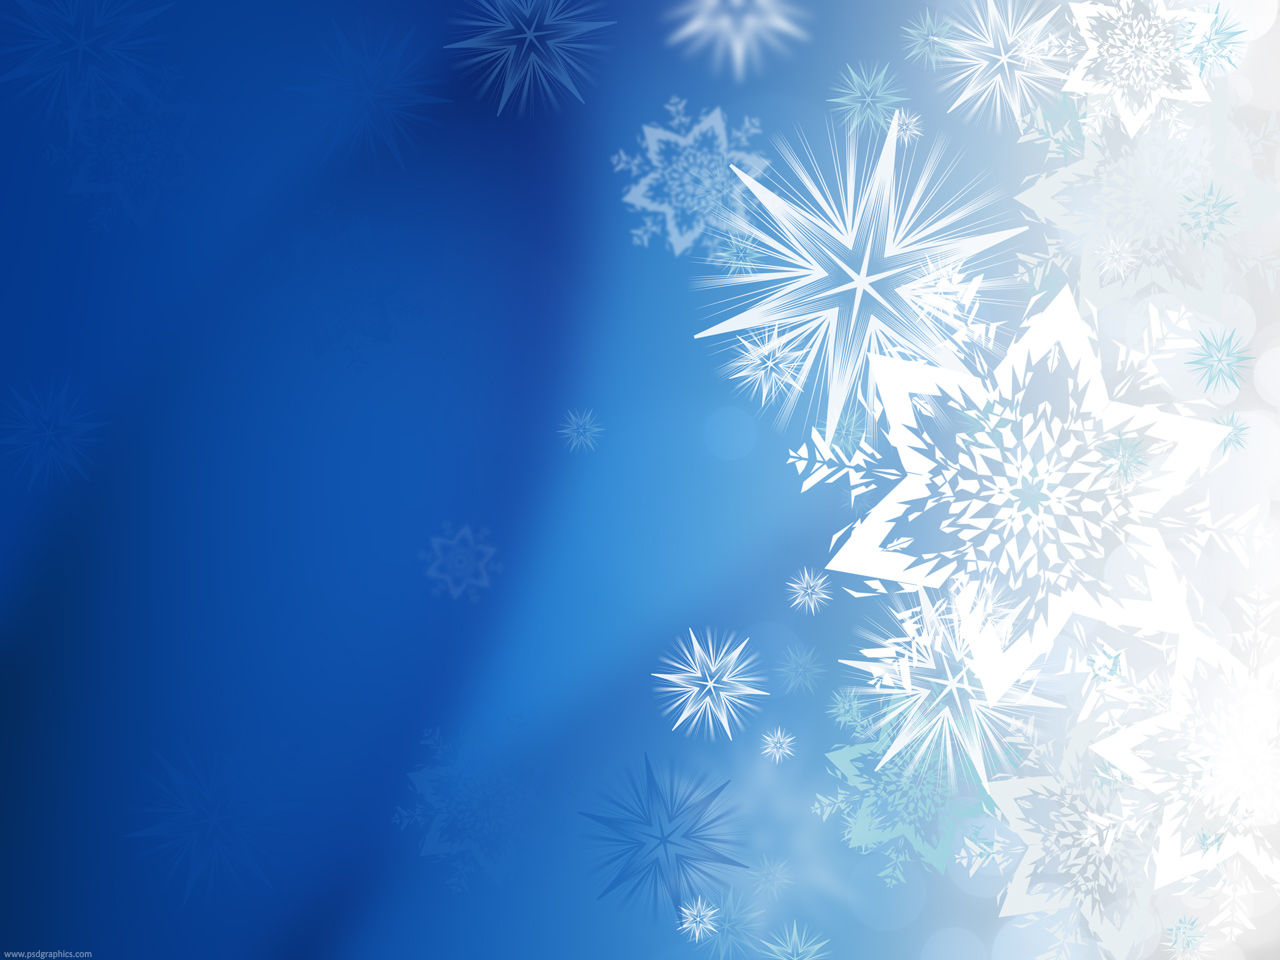 Medium size preview 1280x960px Winter snowflakes background